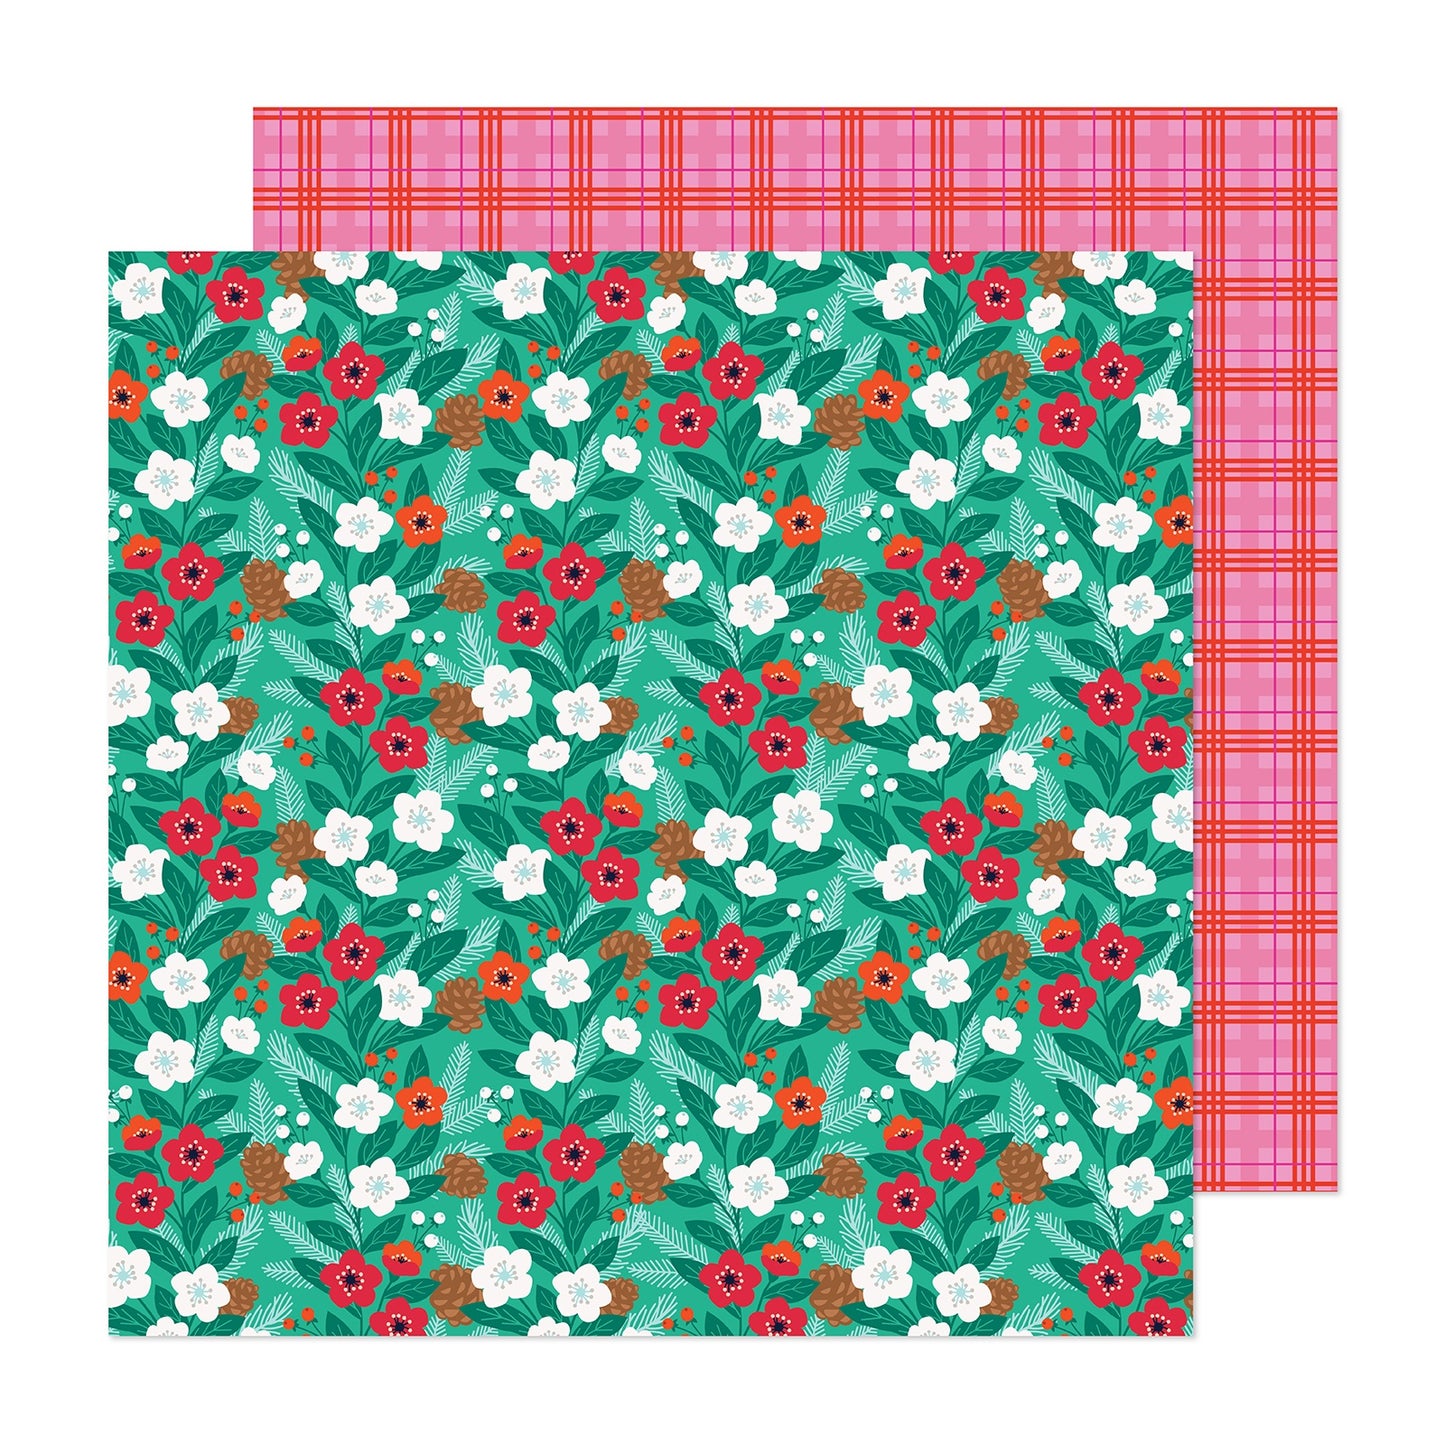 Paige Evans Sugarplum Wishes Double-Sided Cardstock 12"X12"